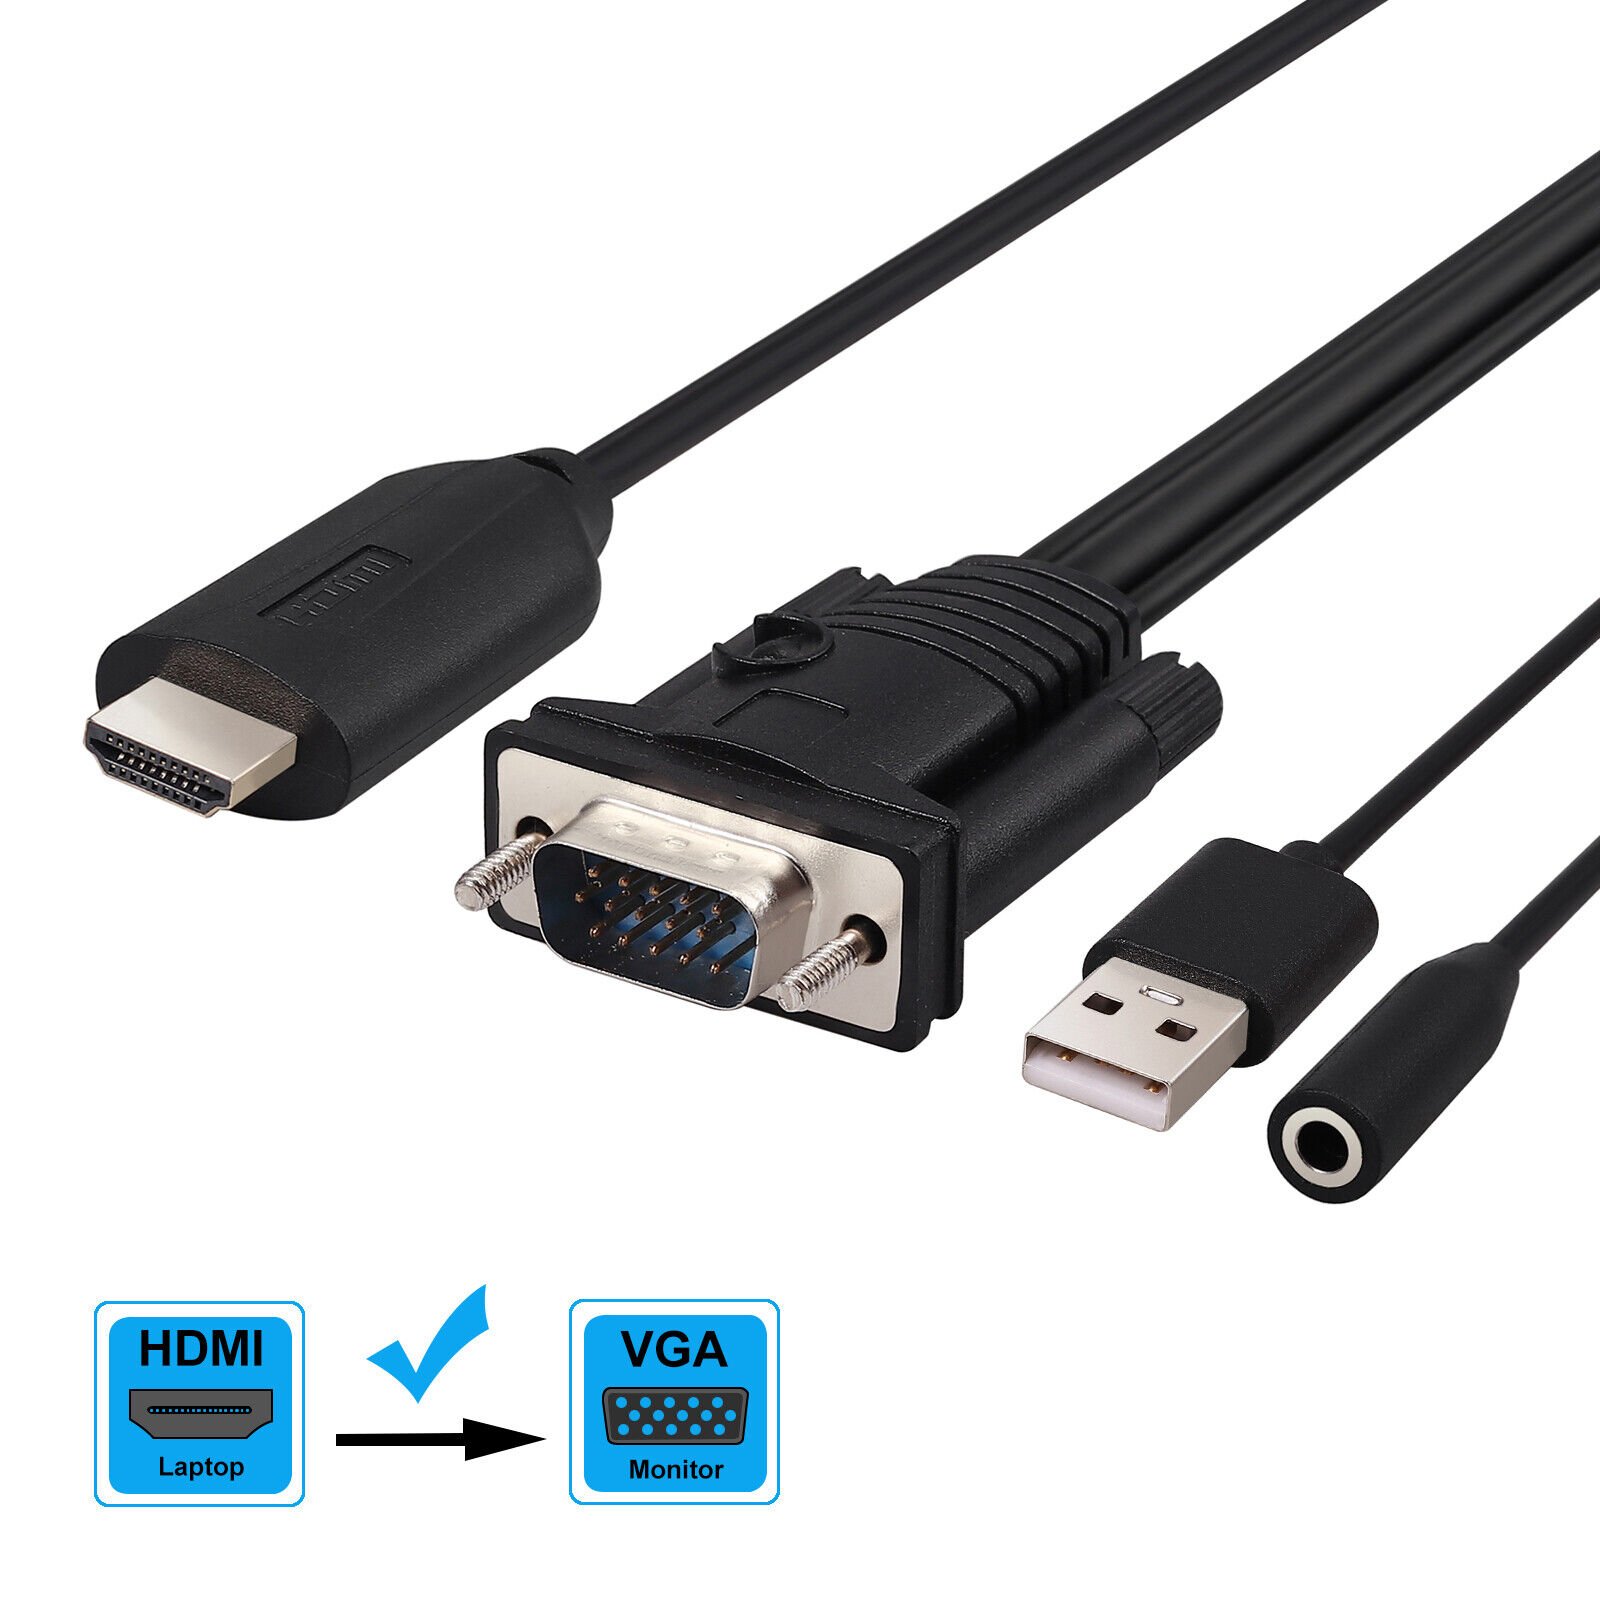 HDMI to VGA Converter 1080P Adapter w/ Female 3.5mm Audio Cable Cord For Xbox TV Unbranded Does Not Apply